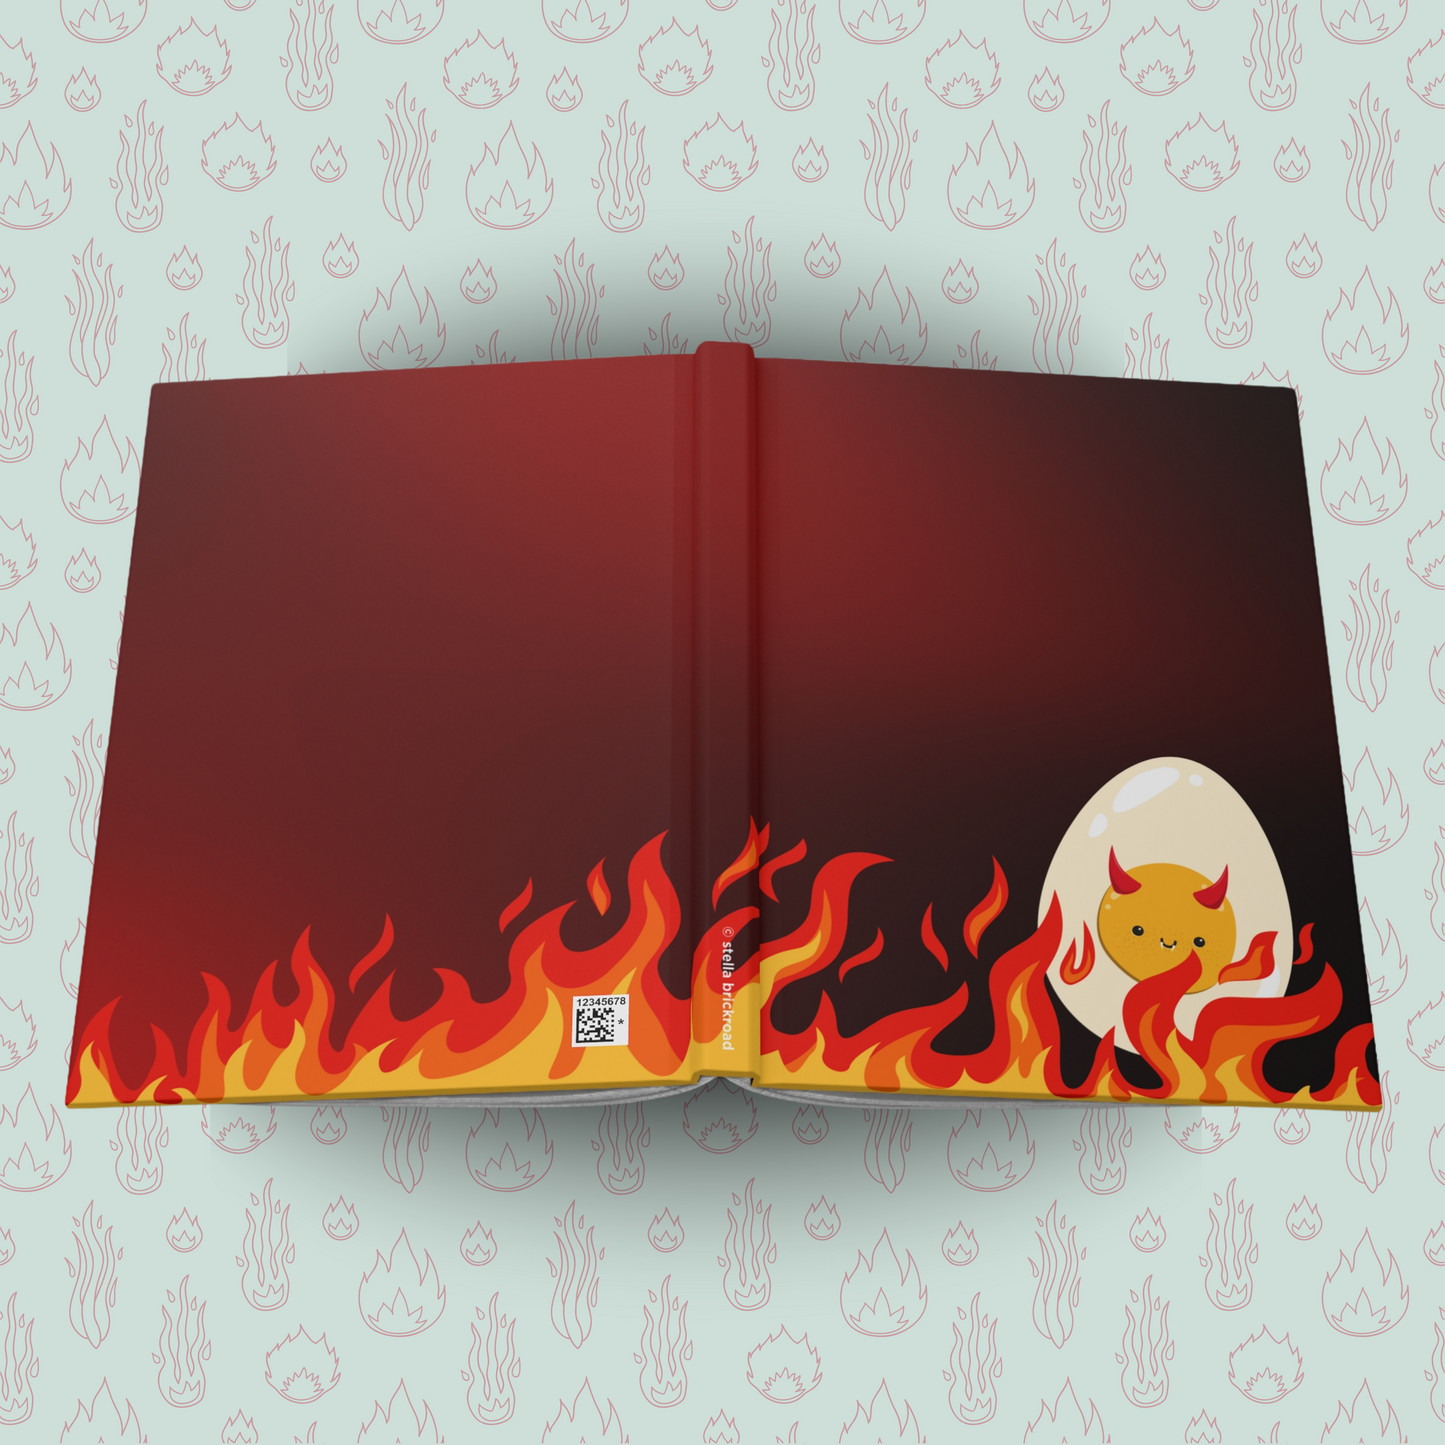 Deviled Egg of Darkness Hardcover Journal Notebook Matte | Cute Creepy Diary | Weirdcore Subversive Blank Lined Notebook